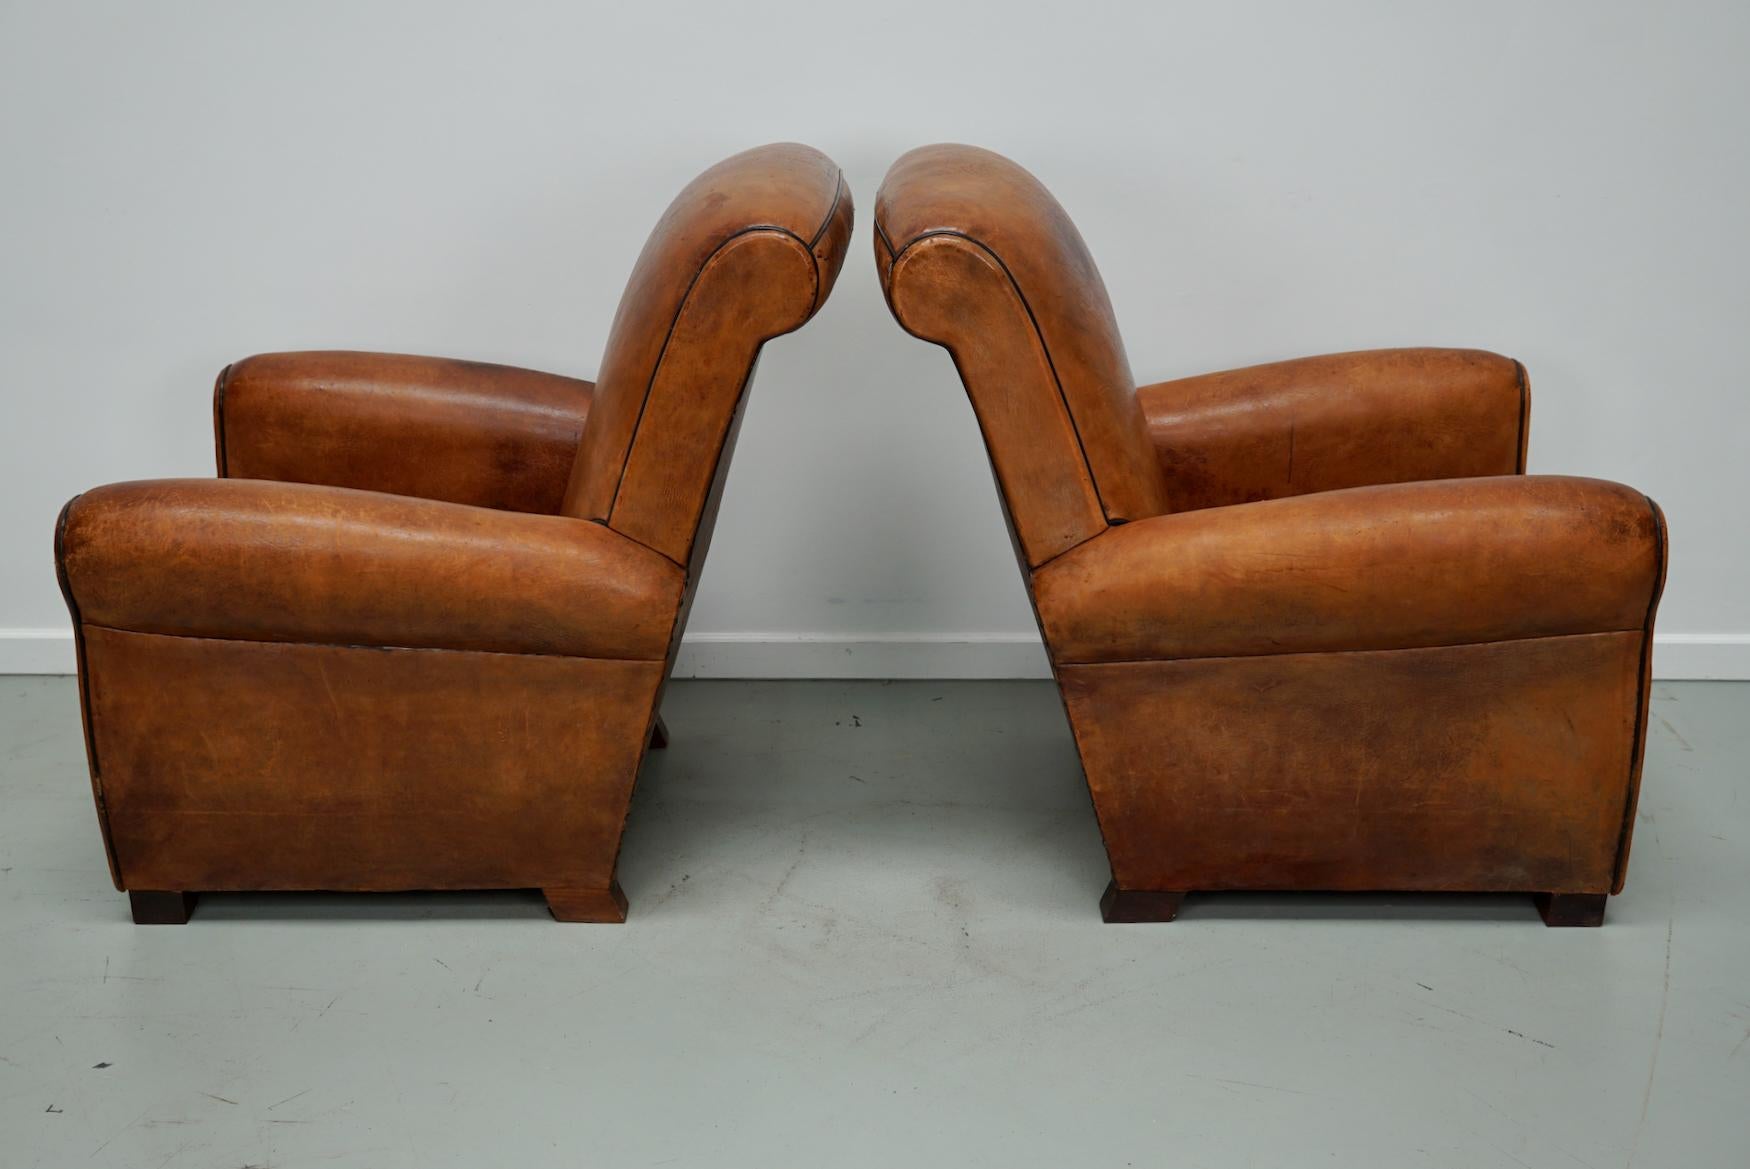  Pair of Vintage French Cognac Leather Club Chairs, Set of 2 9